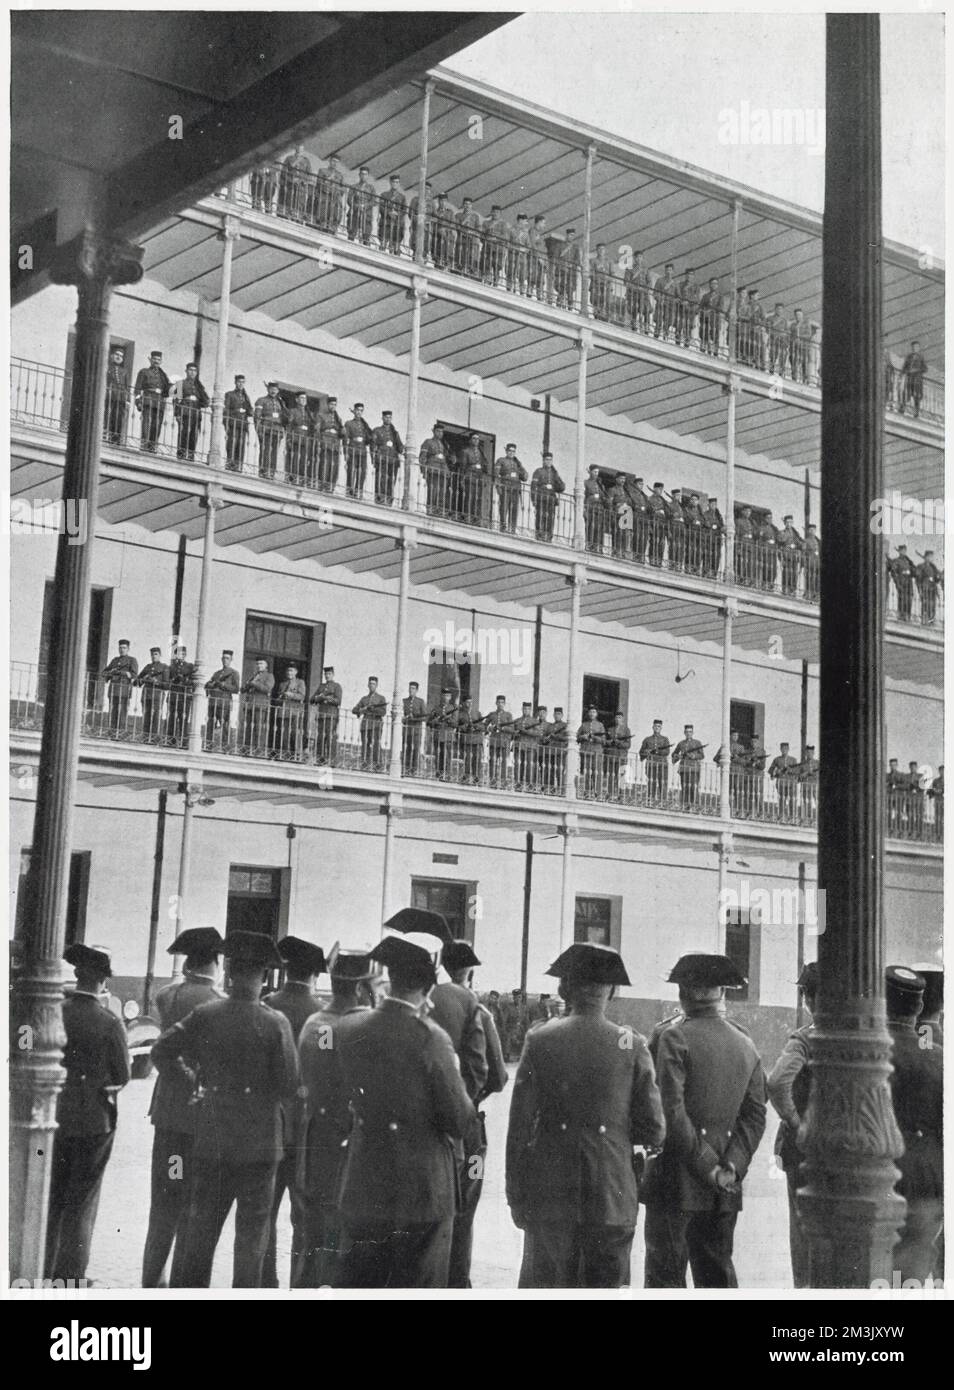 A Civil Guard Parade on a tiered building at their barracks, Spain, 1936. This was deemed a necessary alternative to drilling on the middle of the parade ground, under the burning sun of a summer's day.  The Civil Guard were a cross between a military unit and a police force, who worked to maintain peace and order in Spain in both times of war and peace. The Civil Guard took an active role in the Spanish Civil War, with guardsmen serving both the Republicans and the Nationalists. Stock Photo